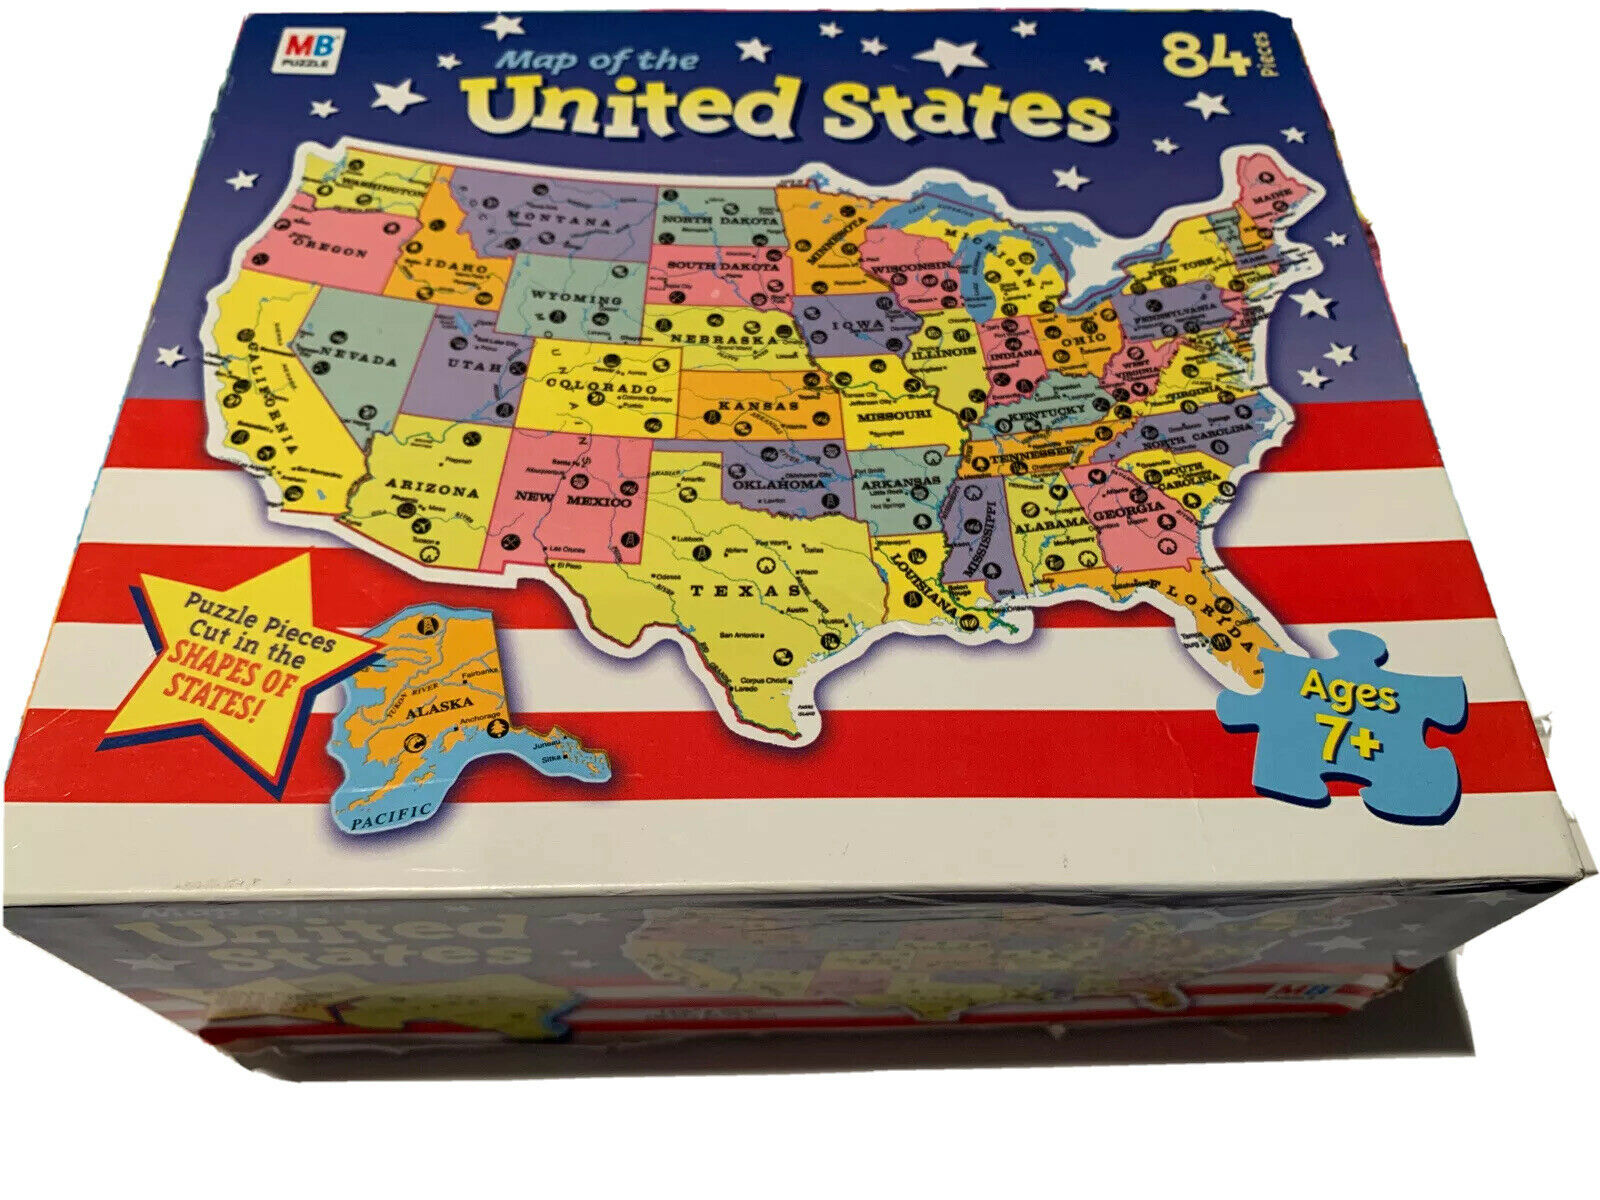 Milton Bradley Puzzle Map Of United States Pieces Cut in Shape of States 84  Pcs. - Nokomis Bookstore & Gift Shop